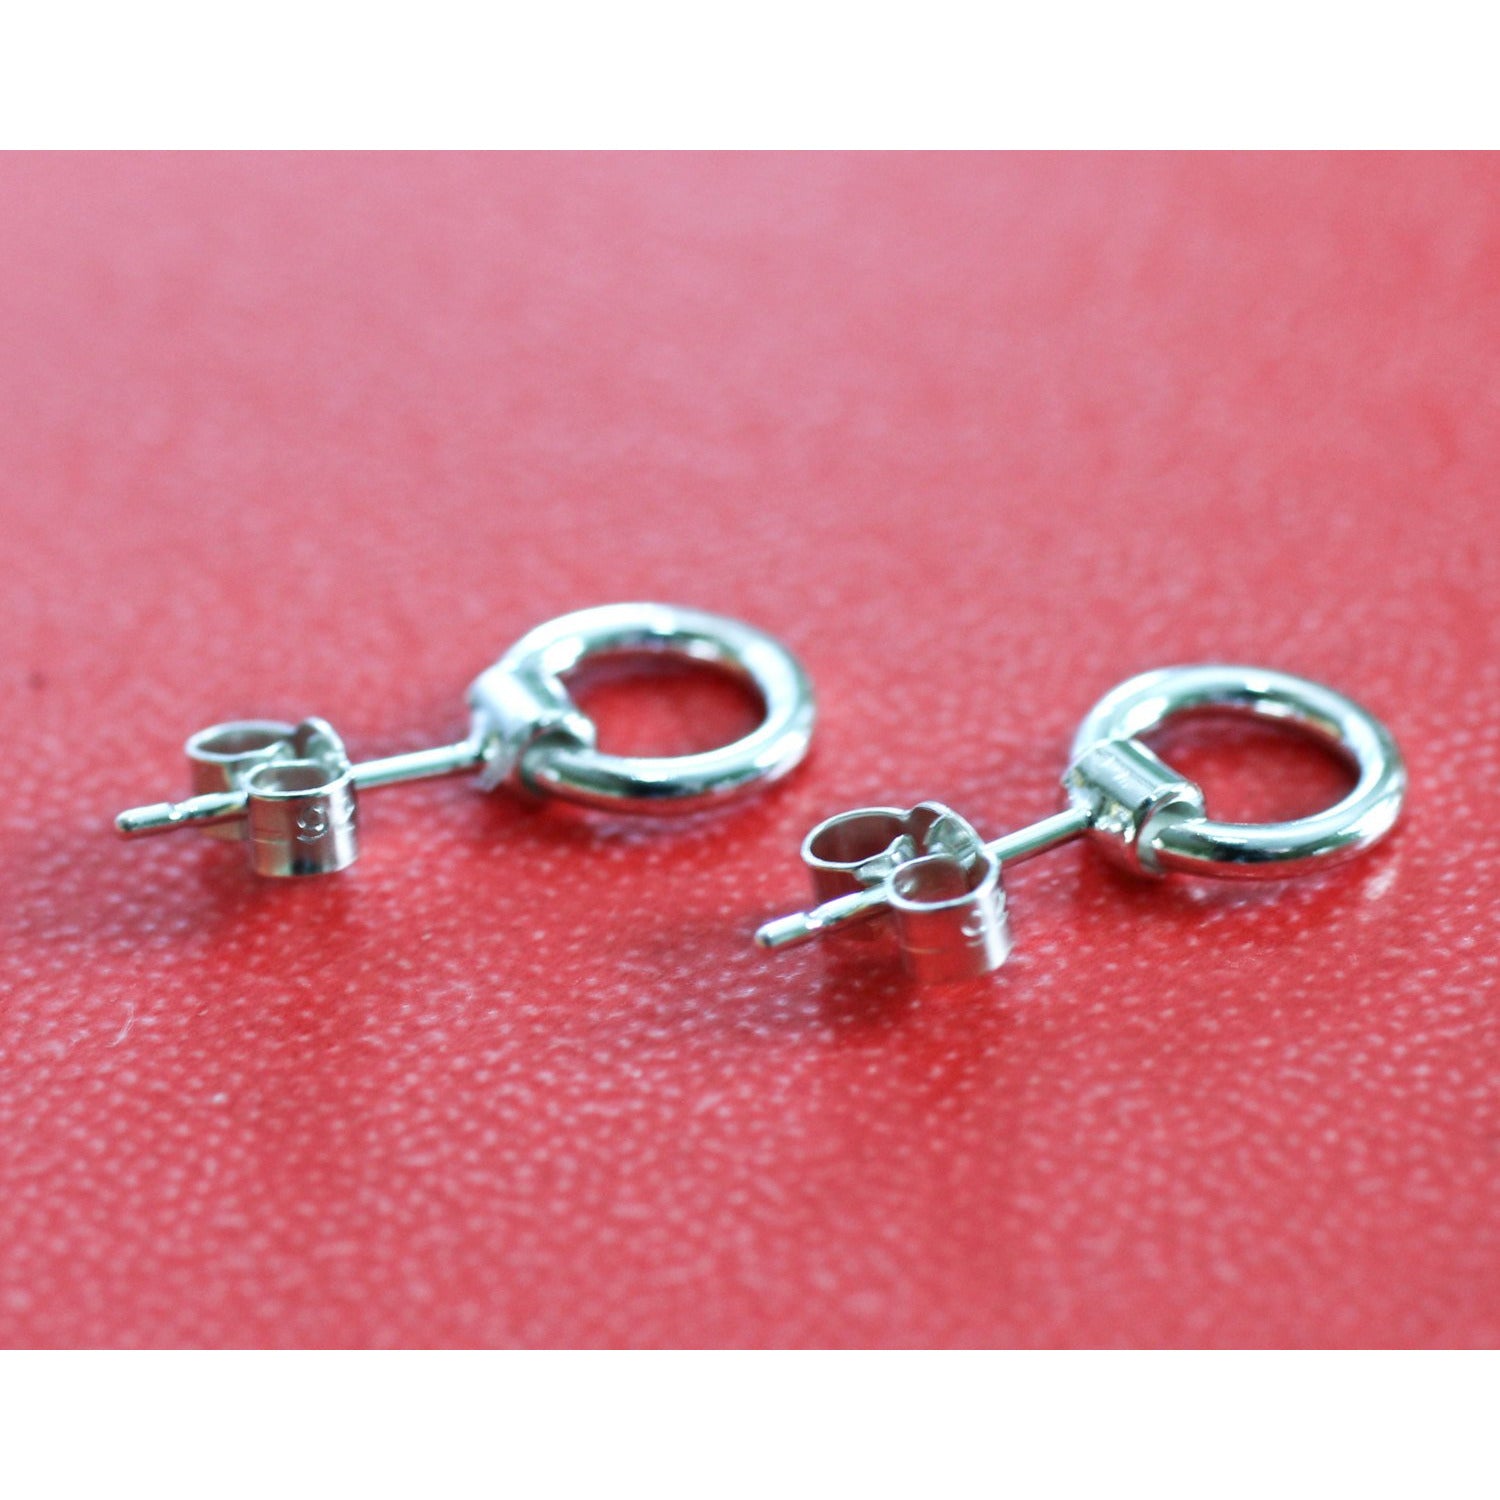 Unique and stylish BDSM earrings: Ring of O shackle studs in sterling silver